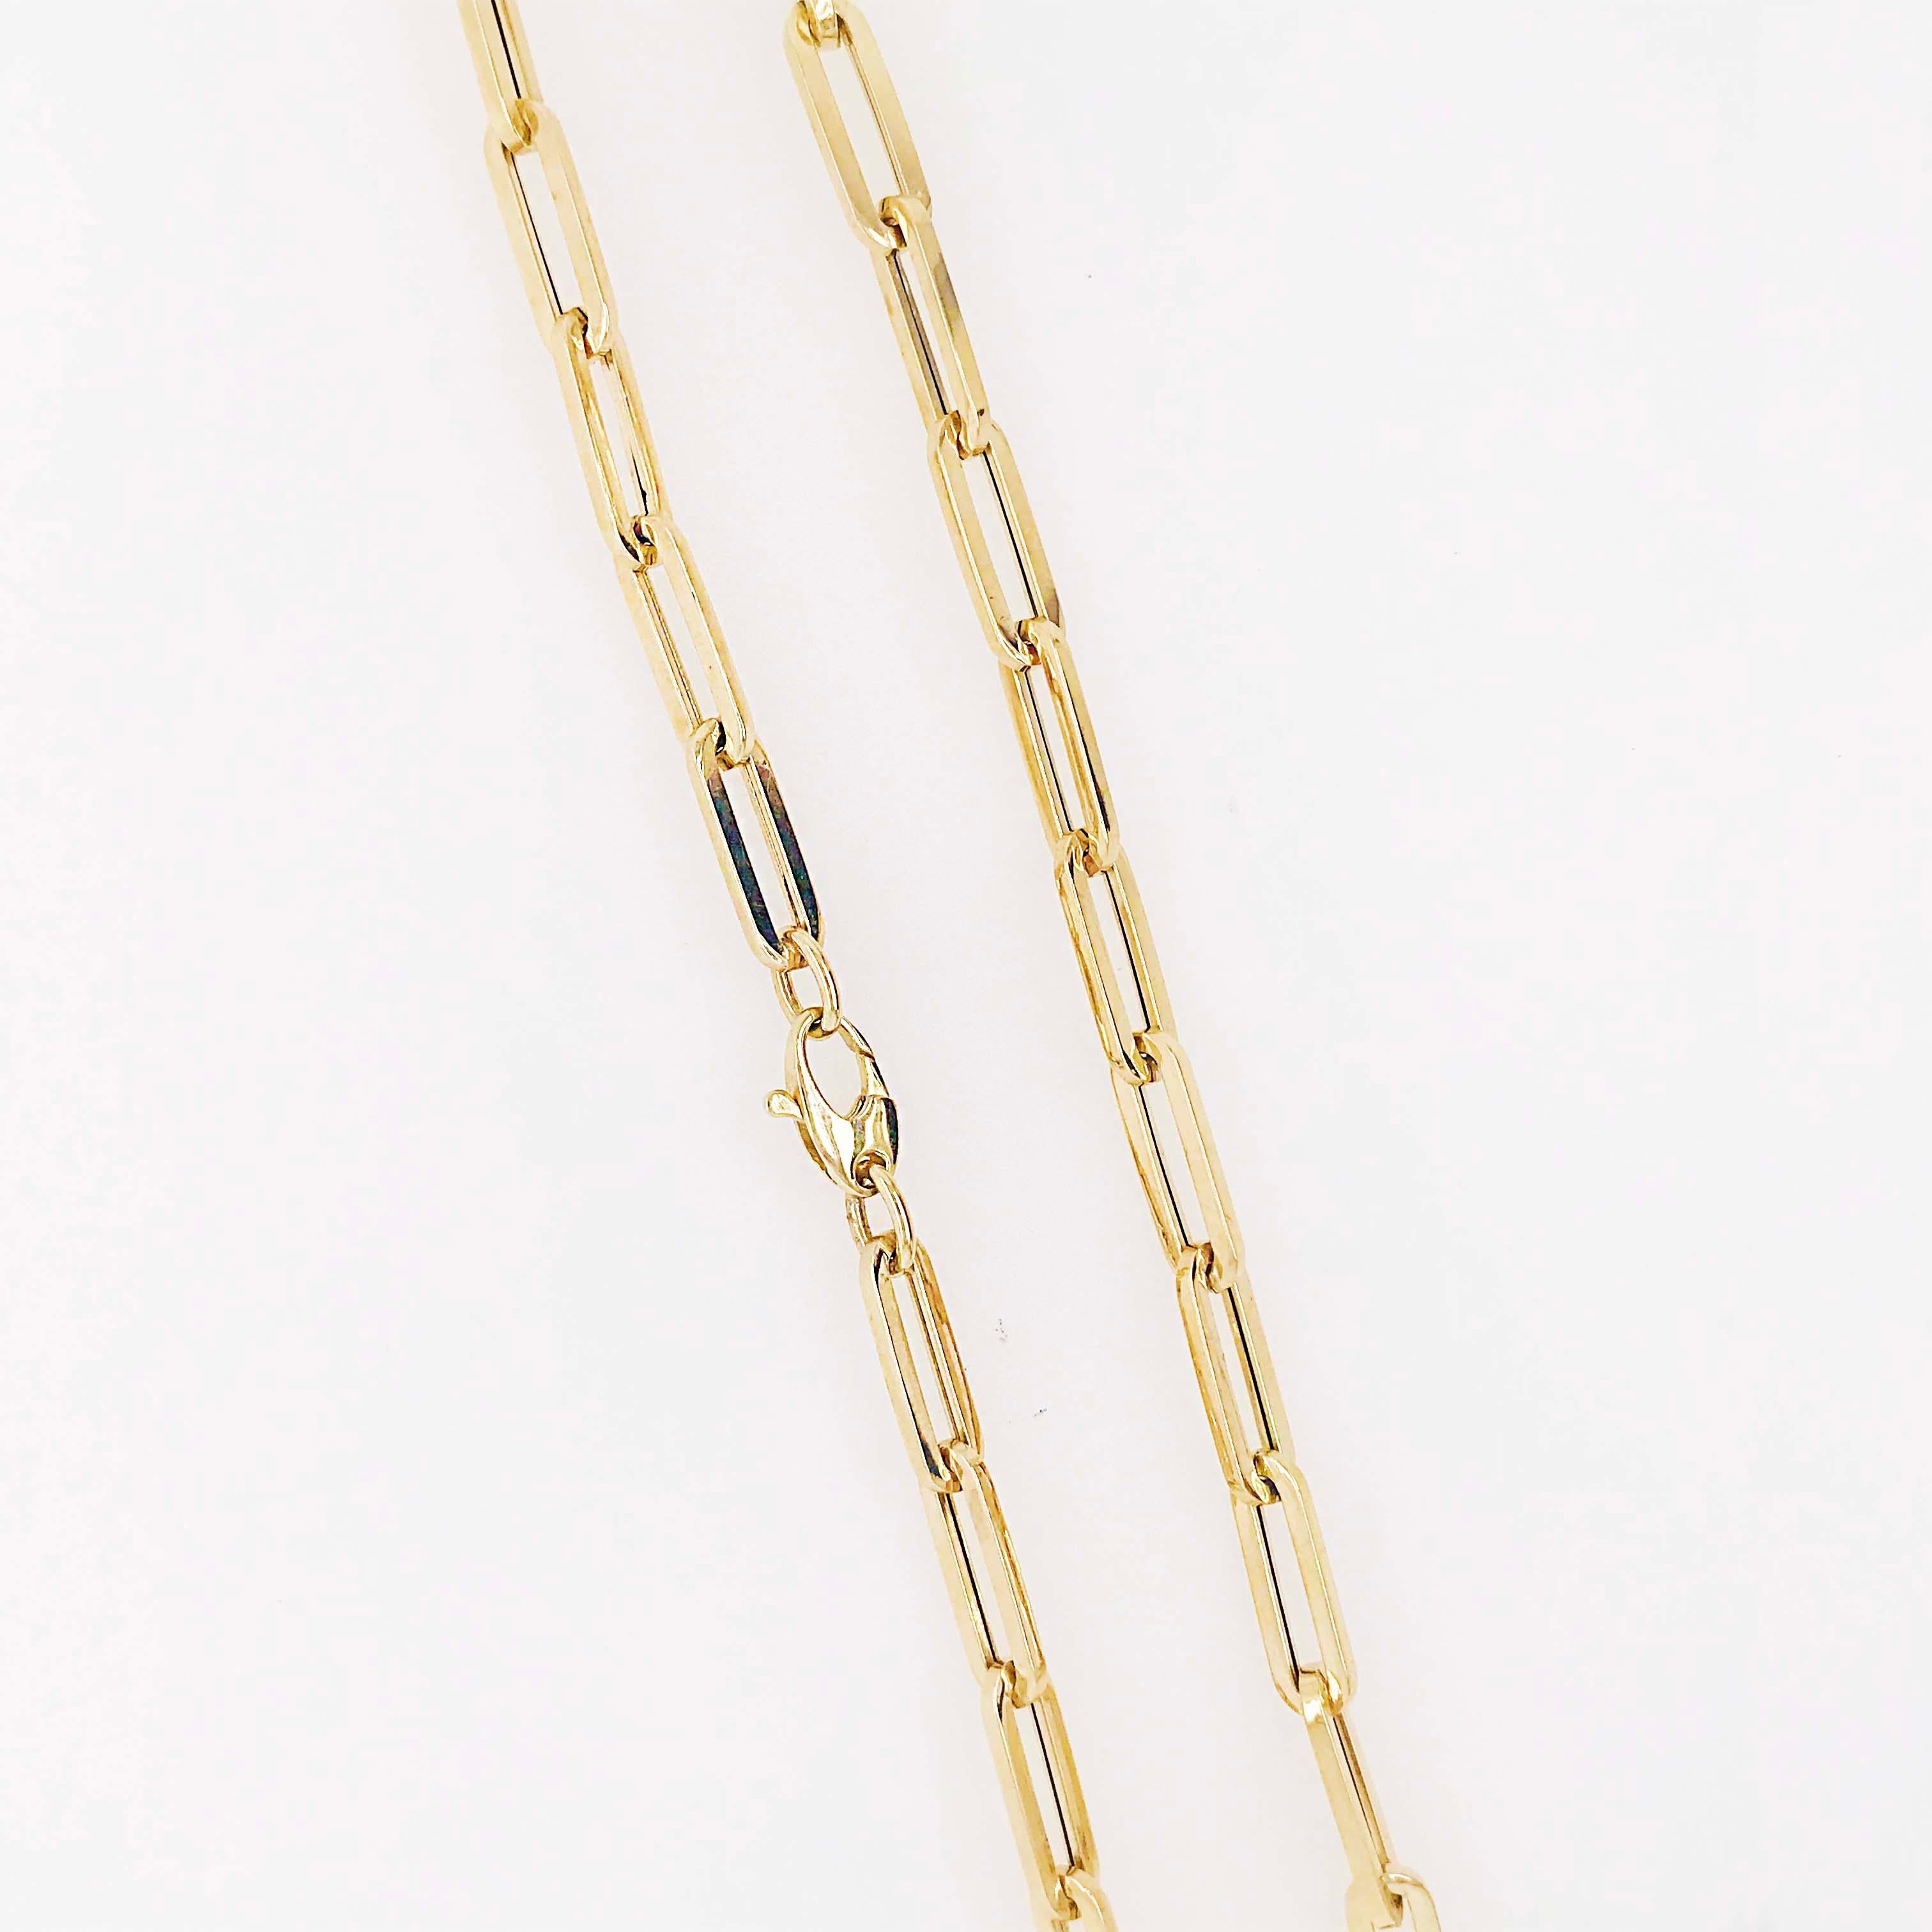 Women's or Men's Gold Paperclip Link Chain Necklace in 14 Karat Gold, 14 Karat Gold Paperclip